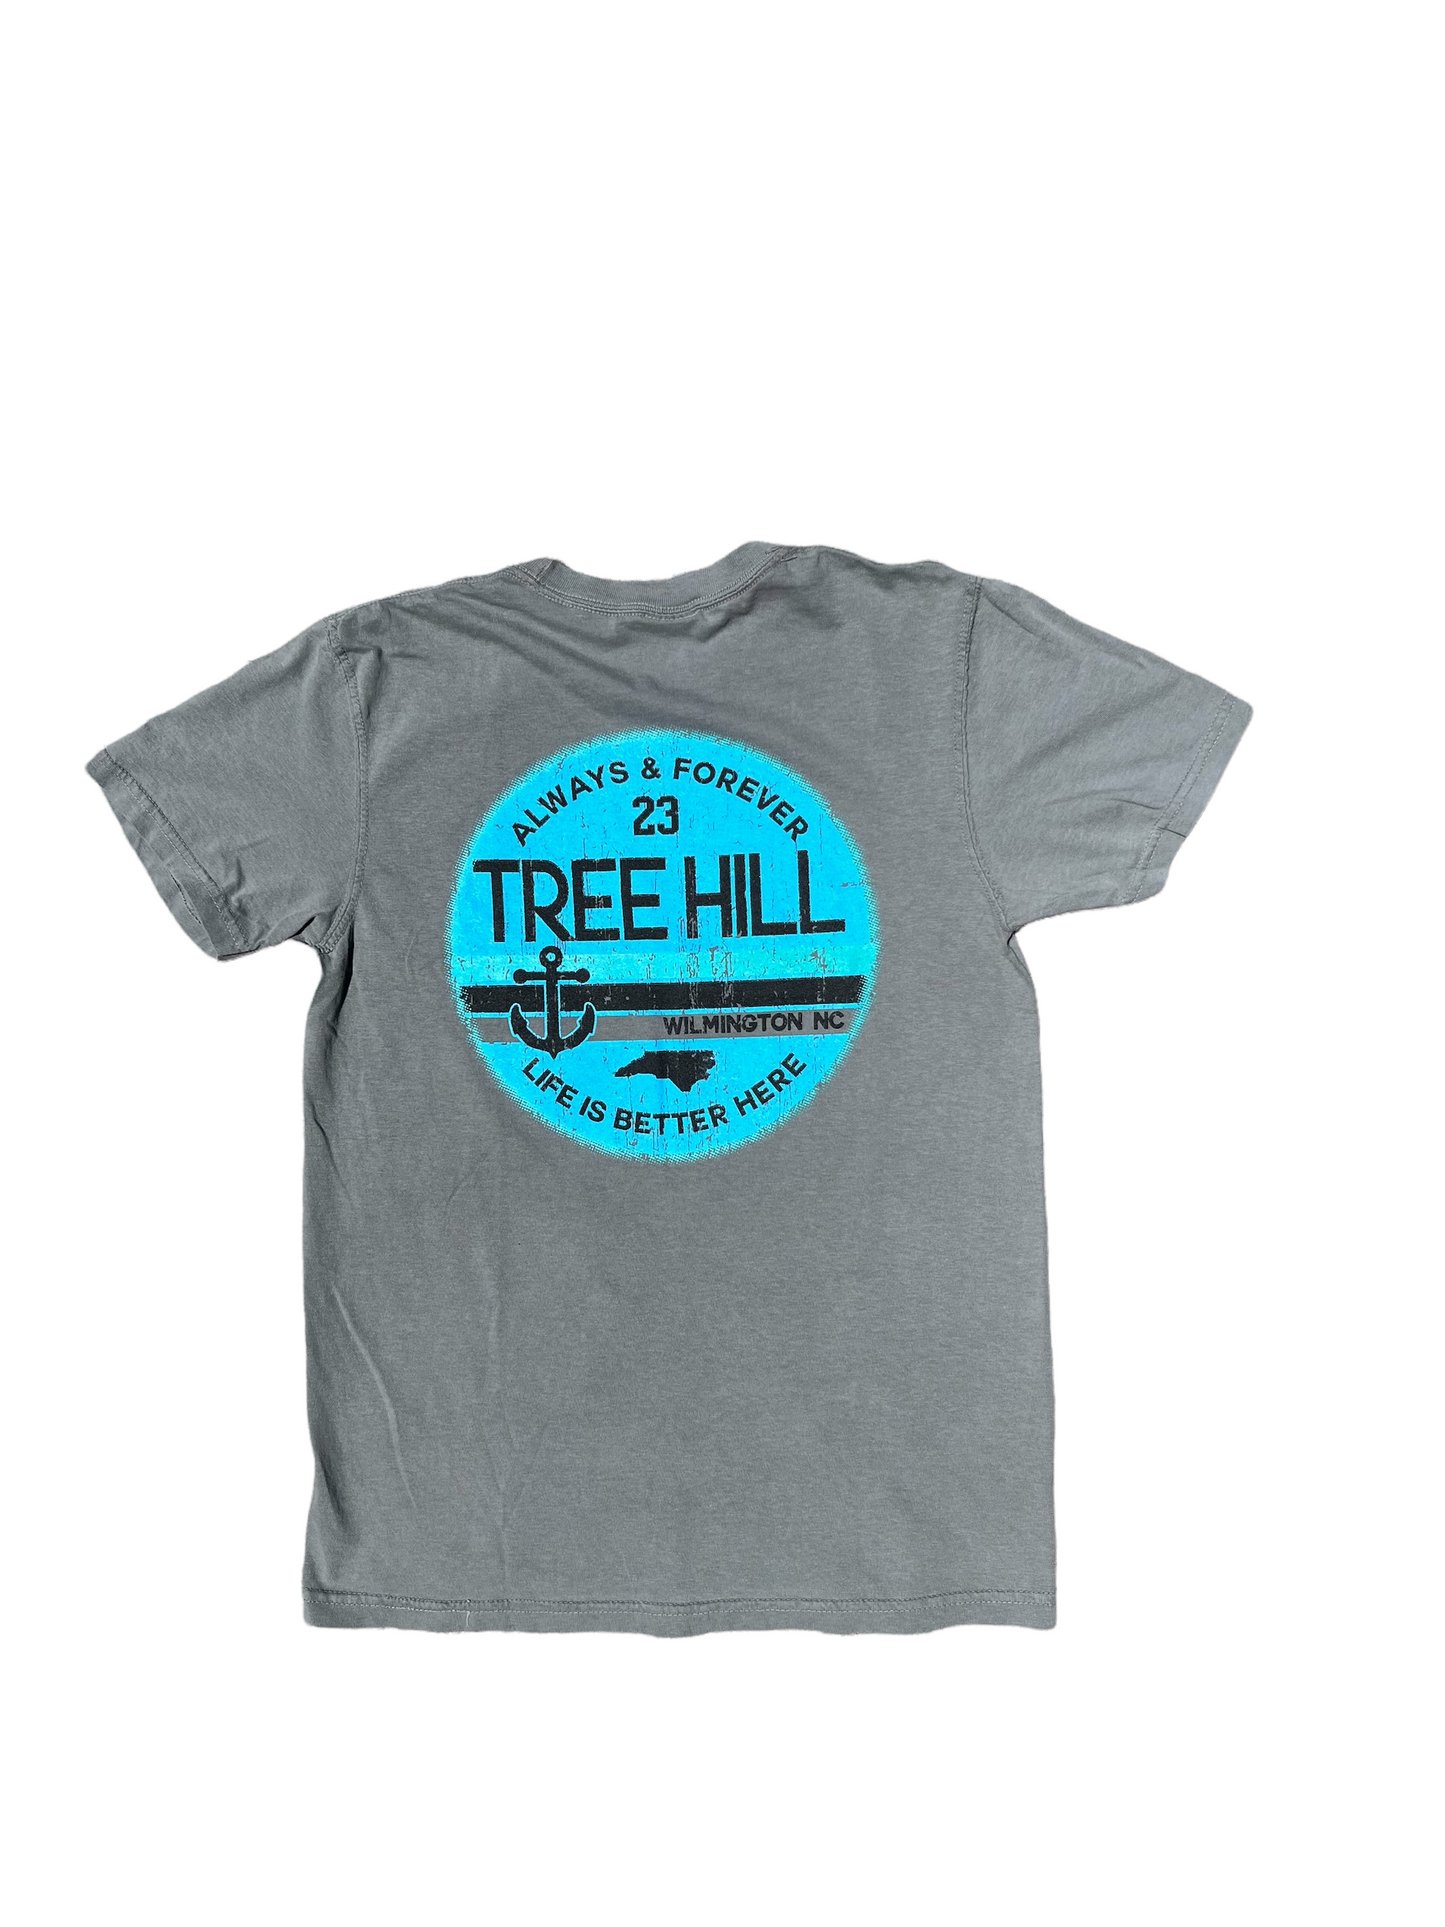 Tree Hill, Life is Better Here - T Shirt - Grey